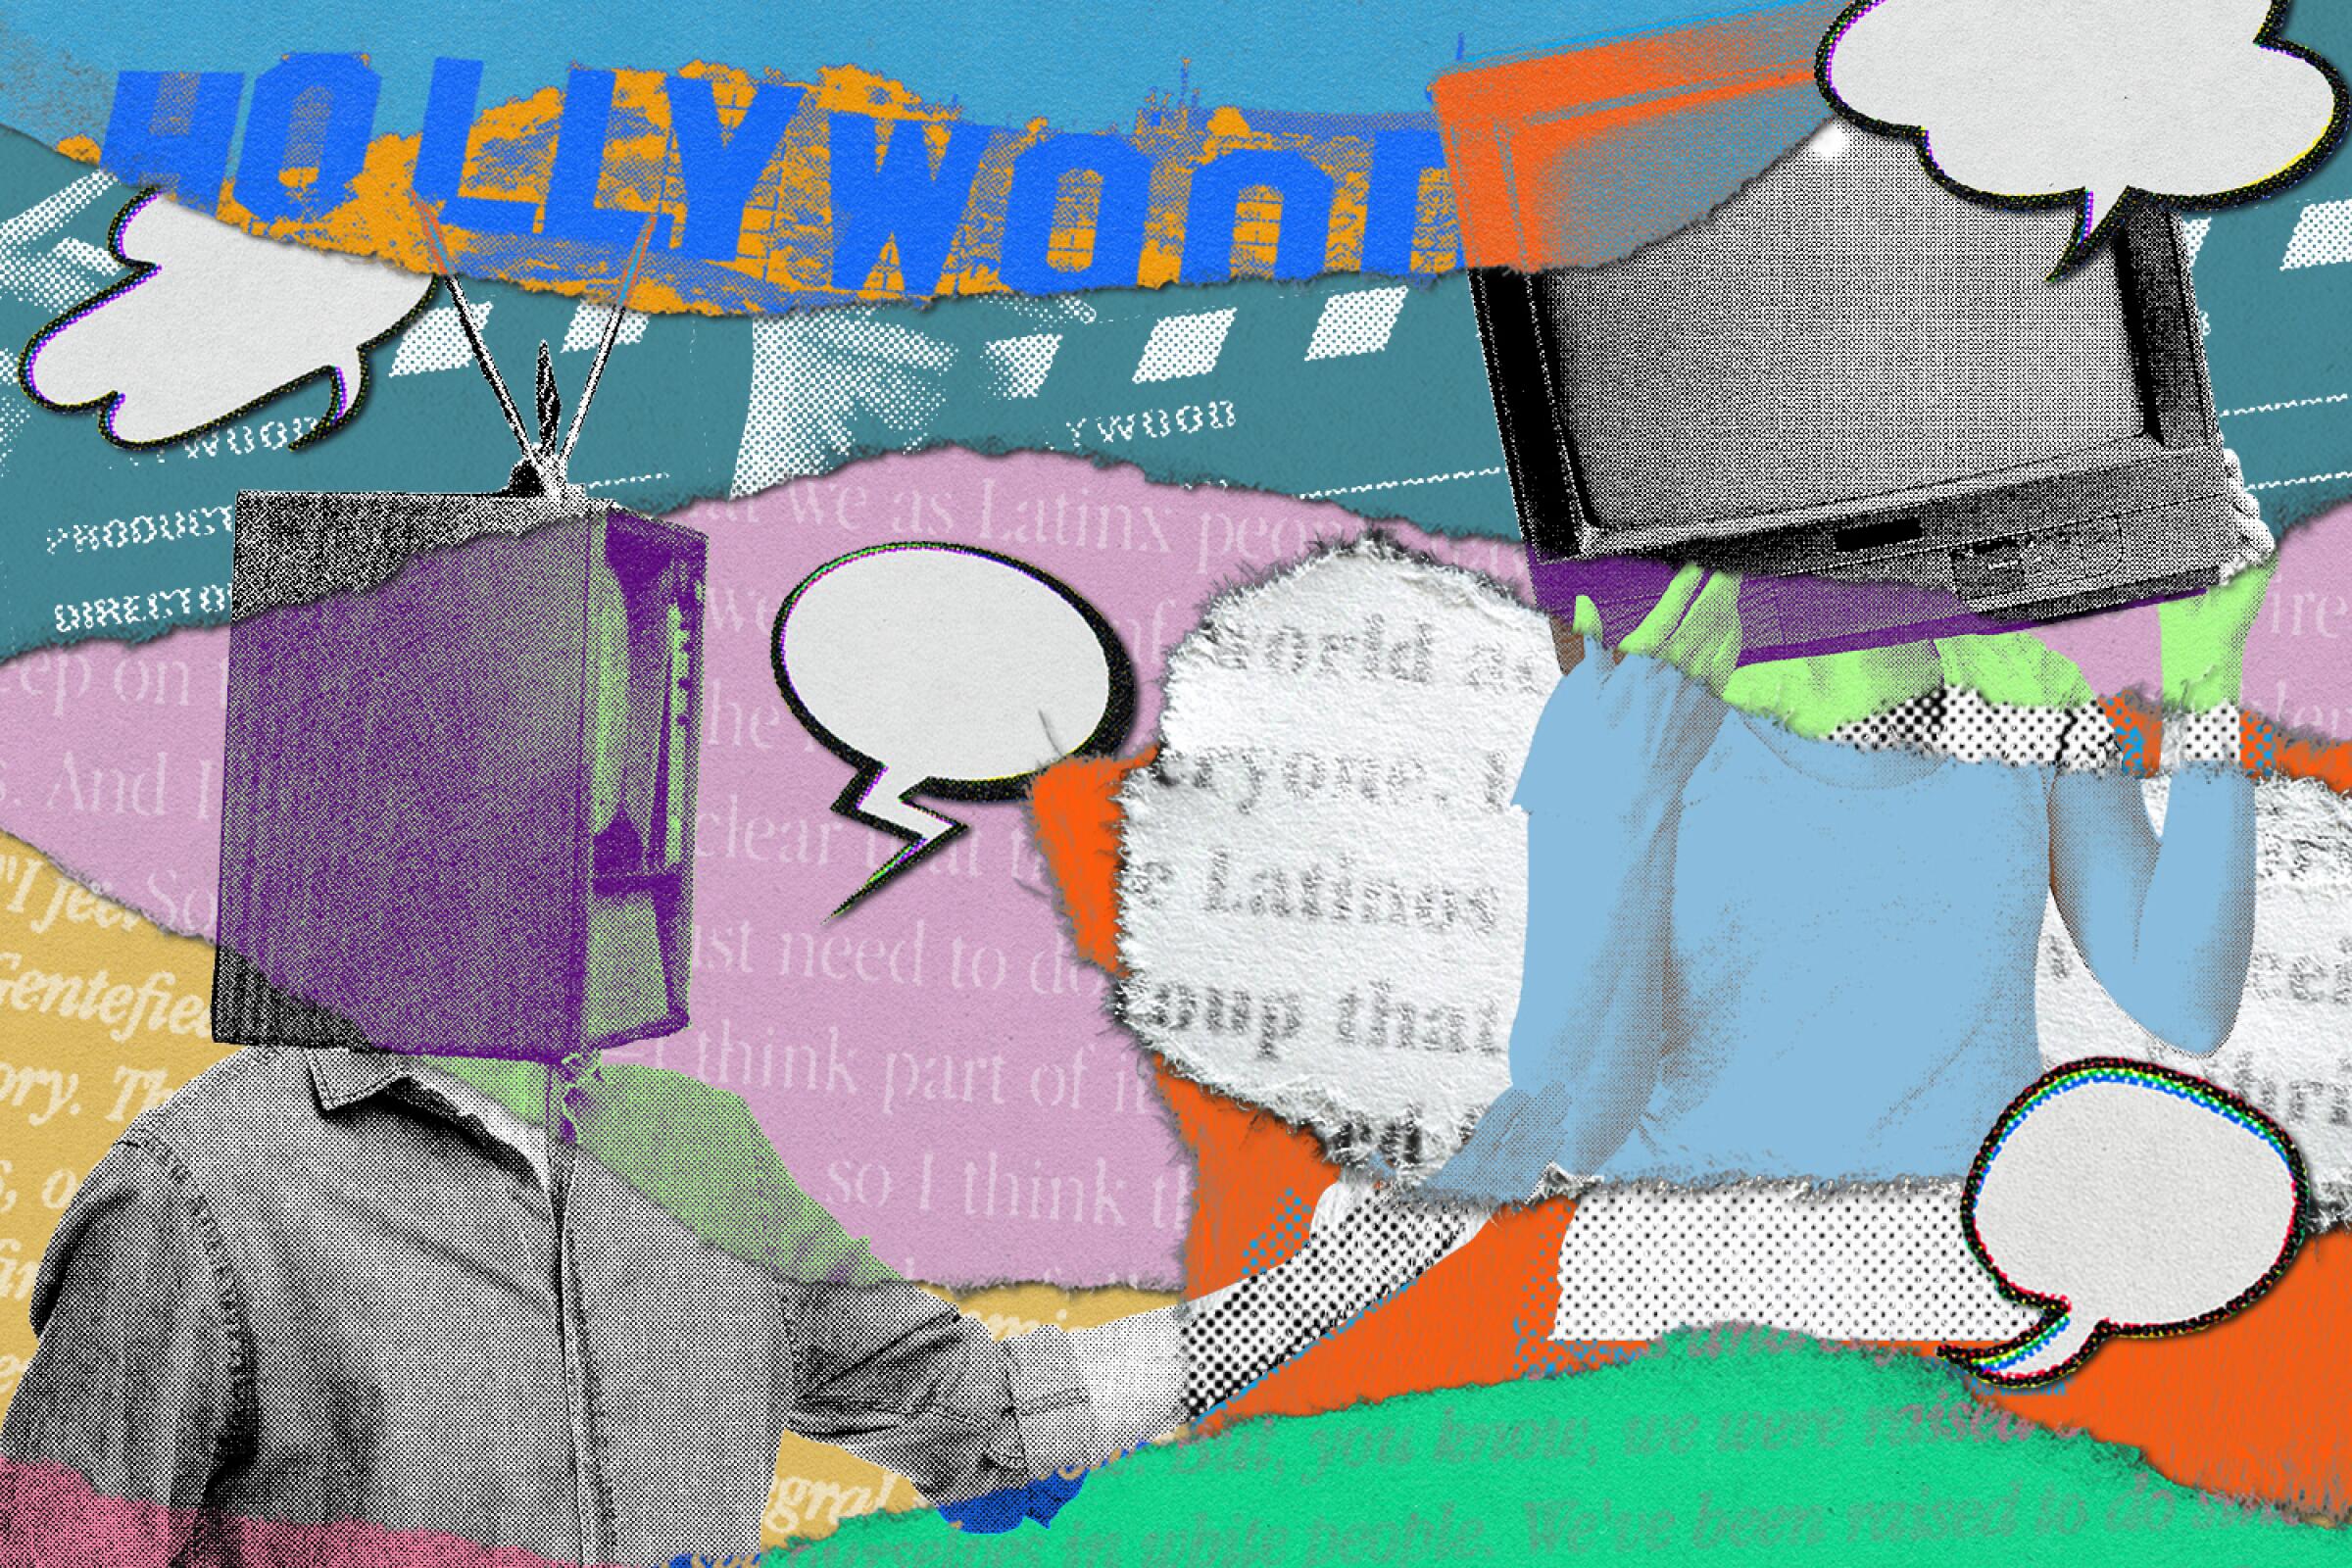 Illustration of different colored paper strips with text on them, the Hollywood sign image and two people with TVs for heads.